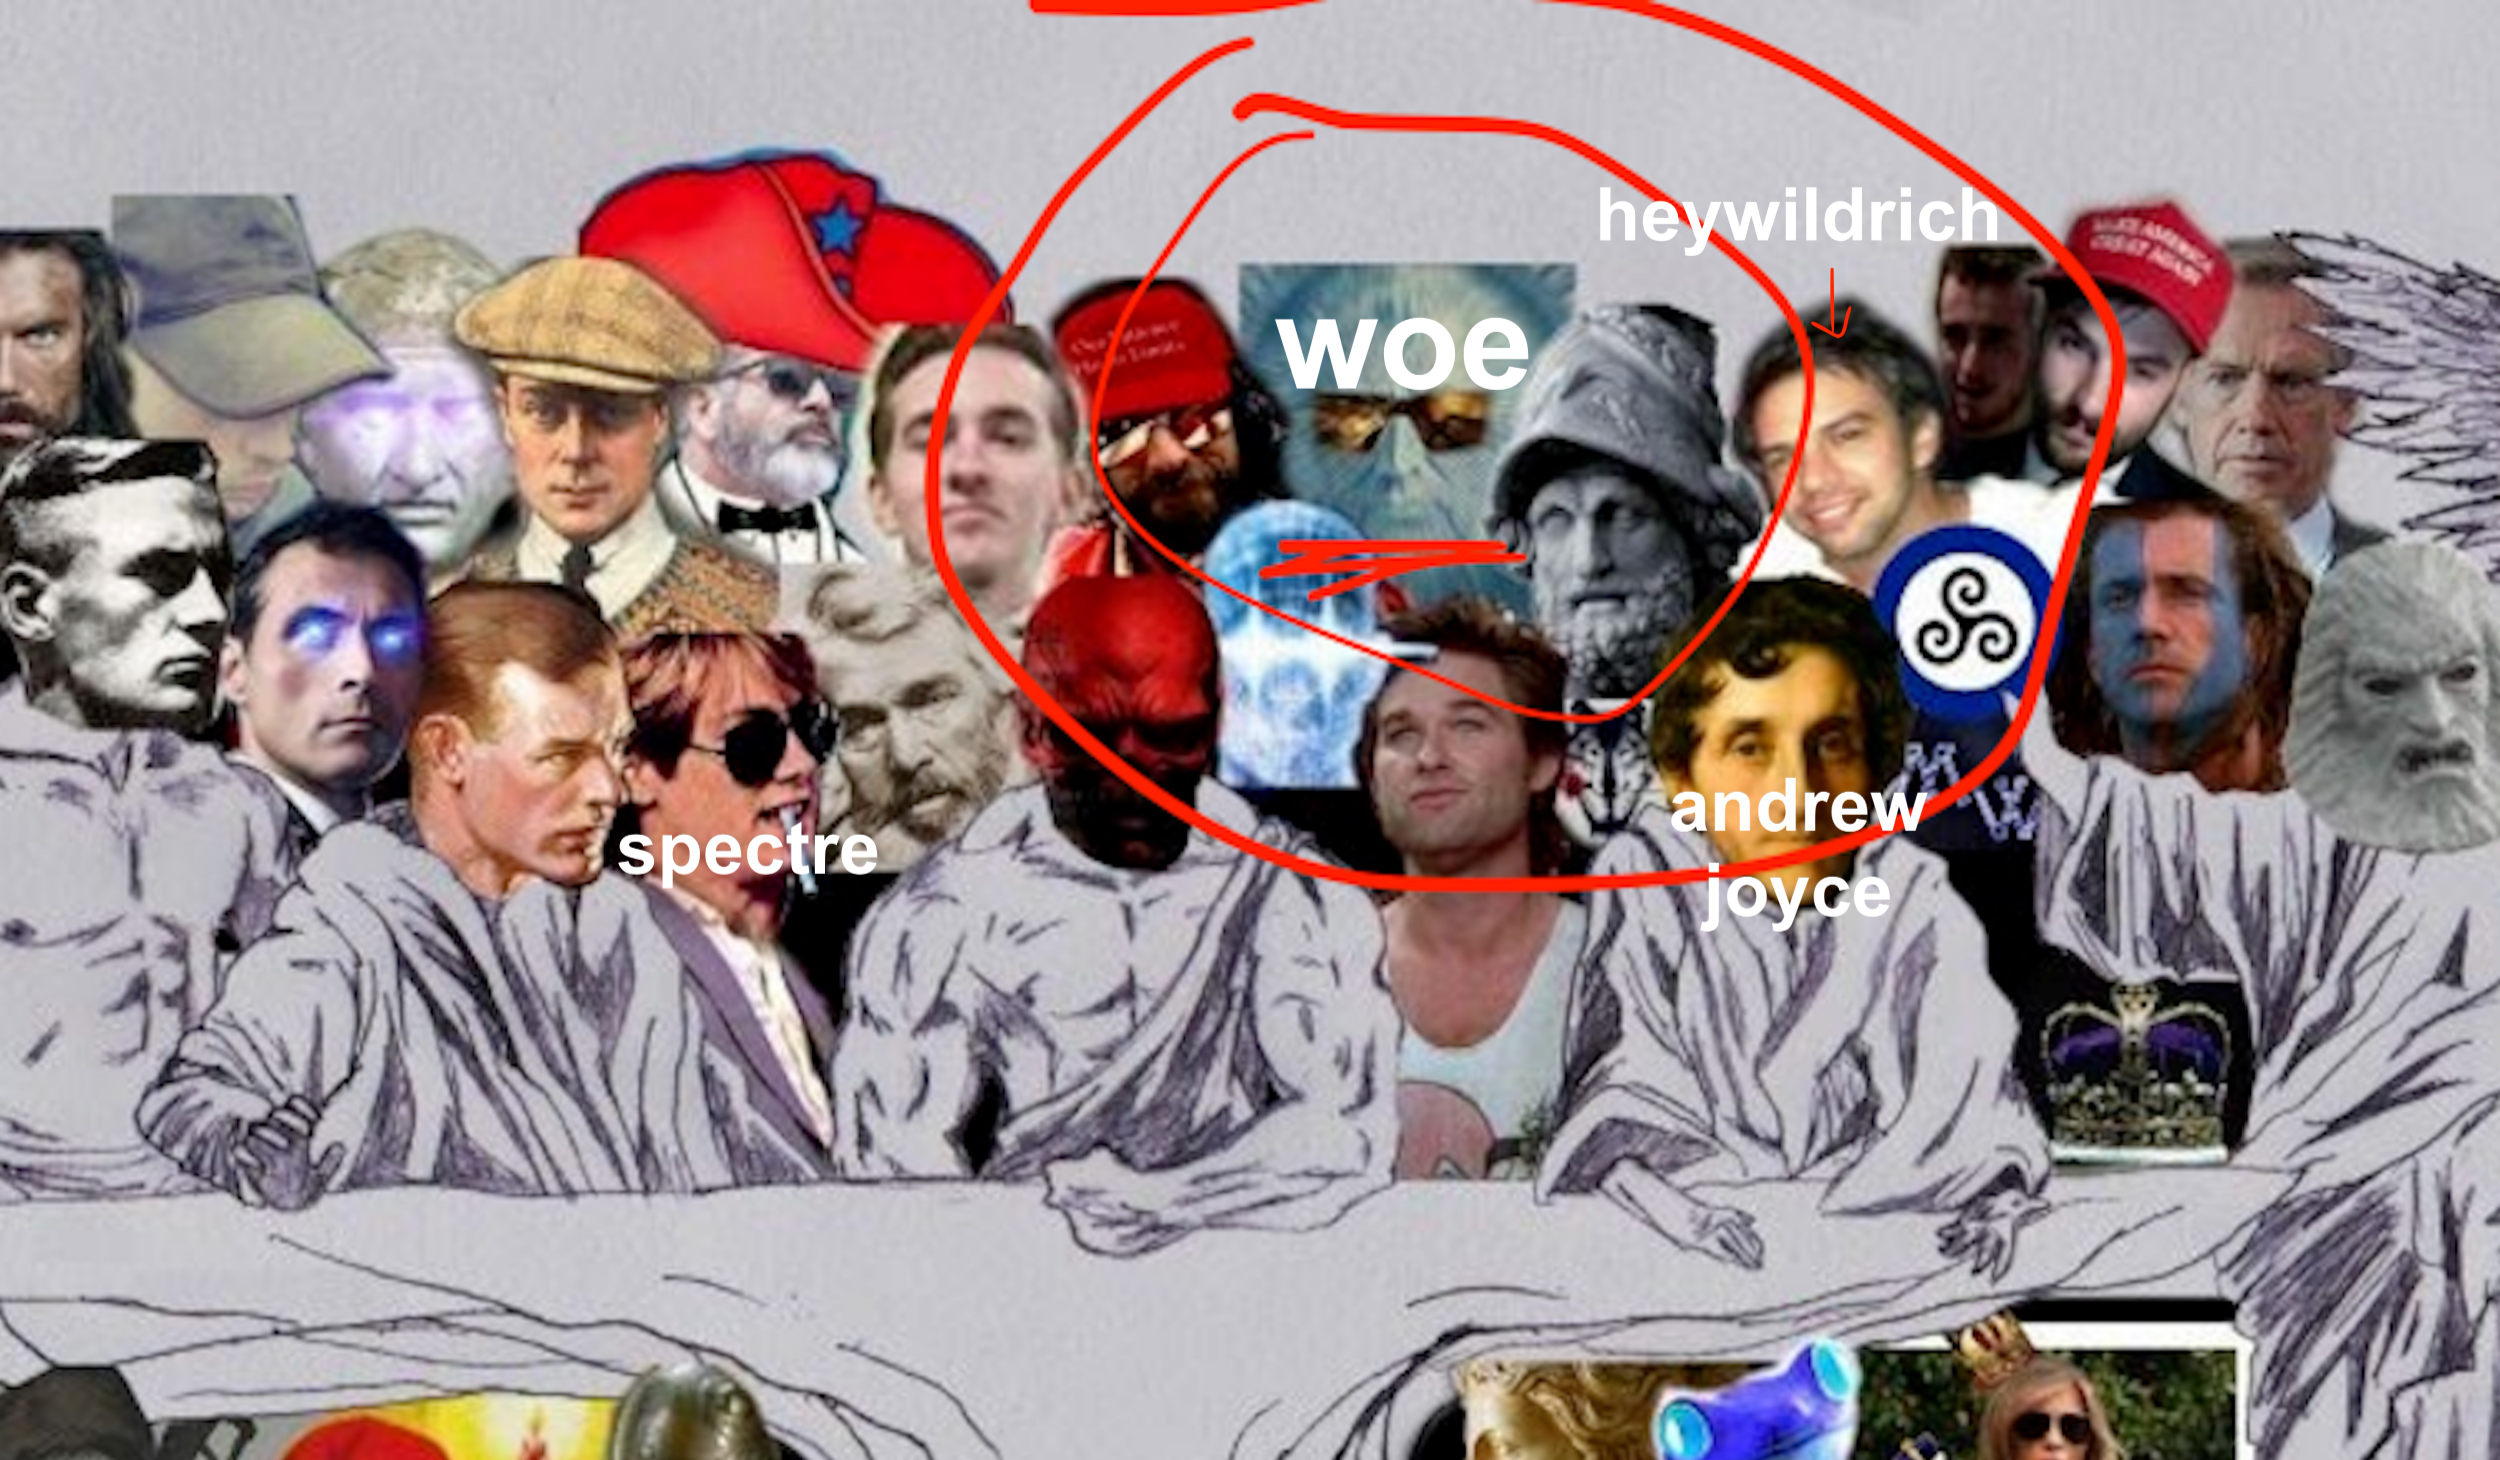 Closeup of section of Arthur Angell collage, with Woe's HermannBillung avatar circled and ID'd. Around him, the following avatars are ID'd: "heywildrich," "andrewjoyce," and "spectre" (latter is James Spader). A few other avatars in this shot as well.